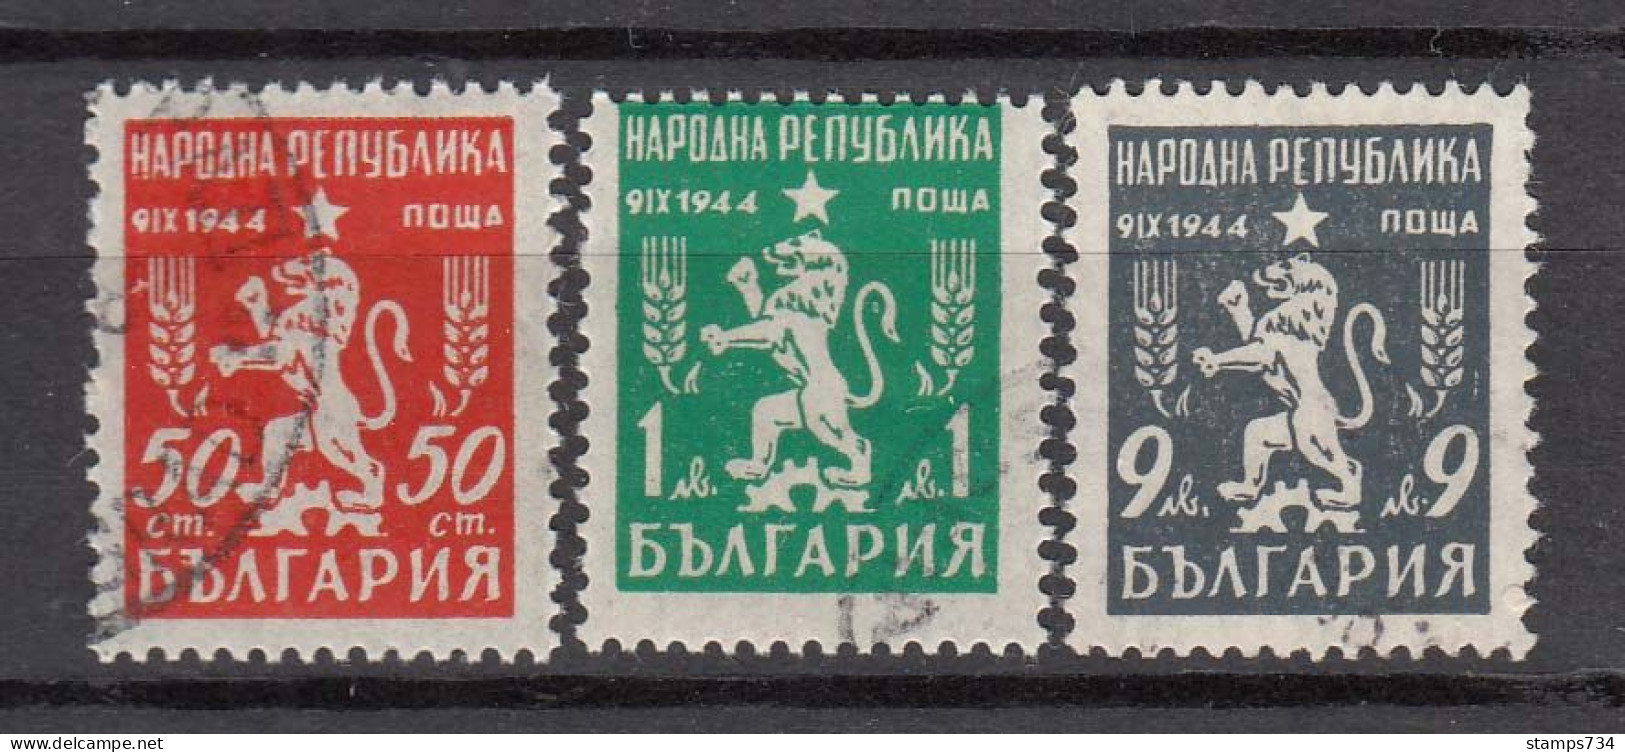 Bulgaria 1948 - Regular Stamps: Coat Of Arms, Mi-Nr. 676/78, Used - Used Stamps